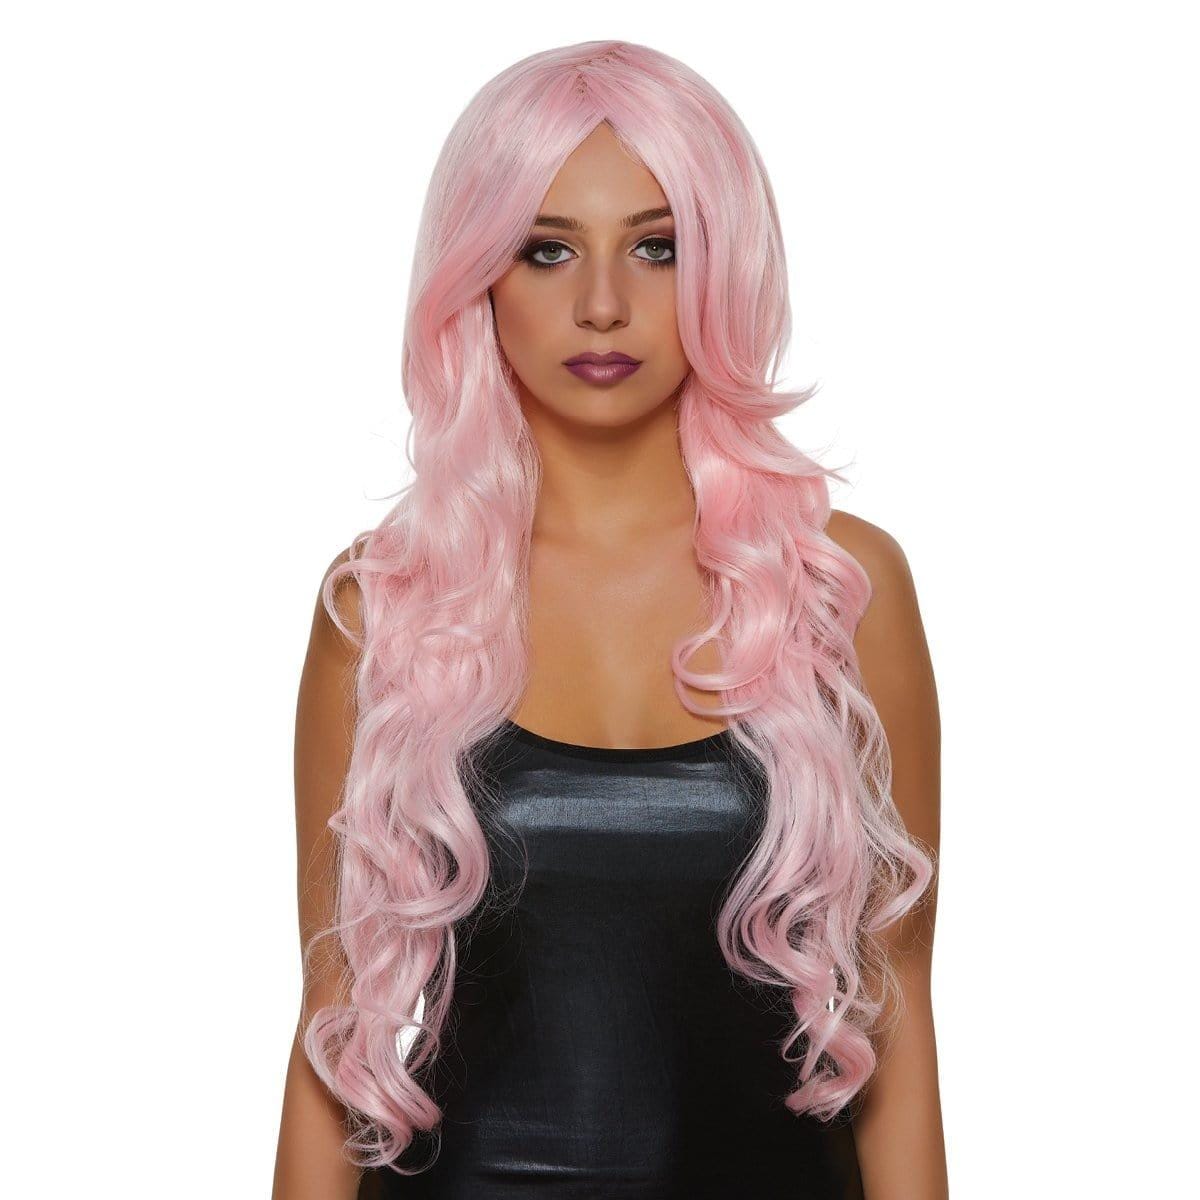 Buy Costume Accessories Cotton candy pink Diva wig for women sold at Party Expert